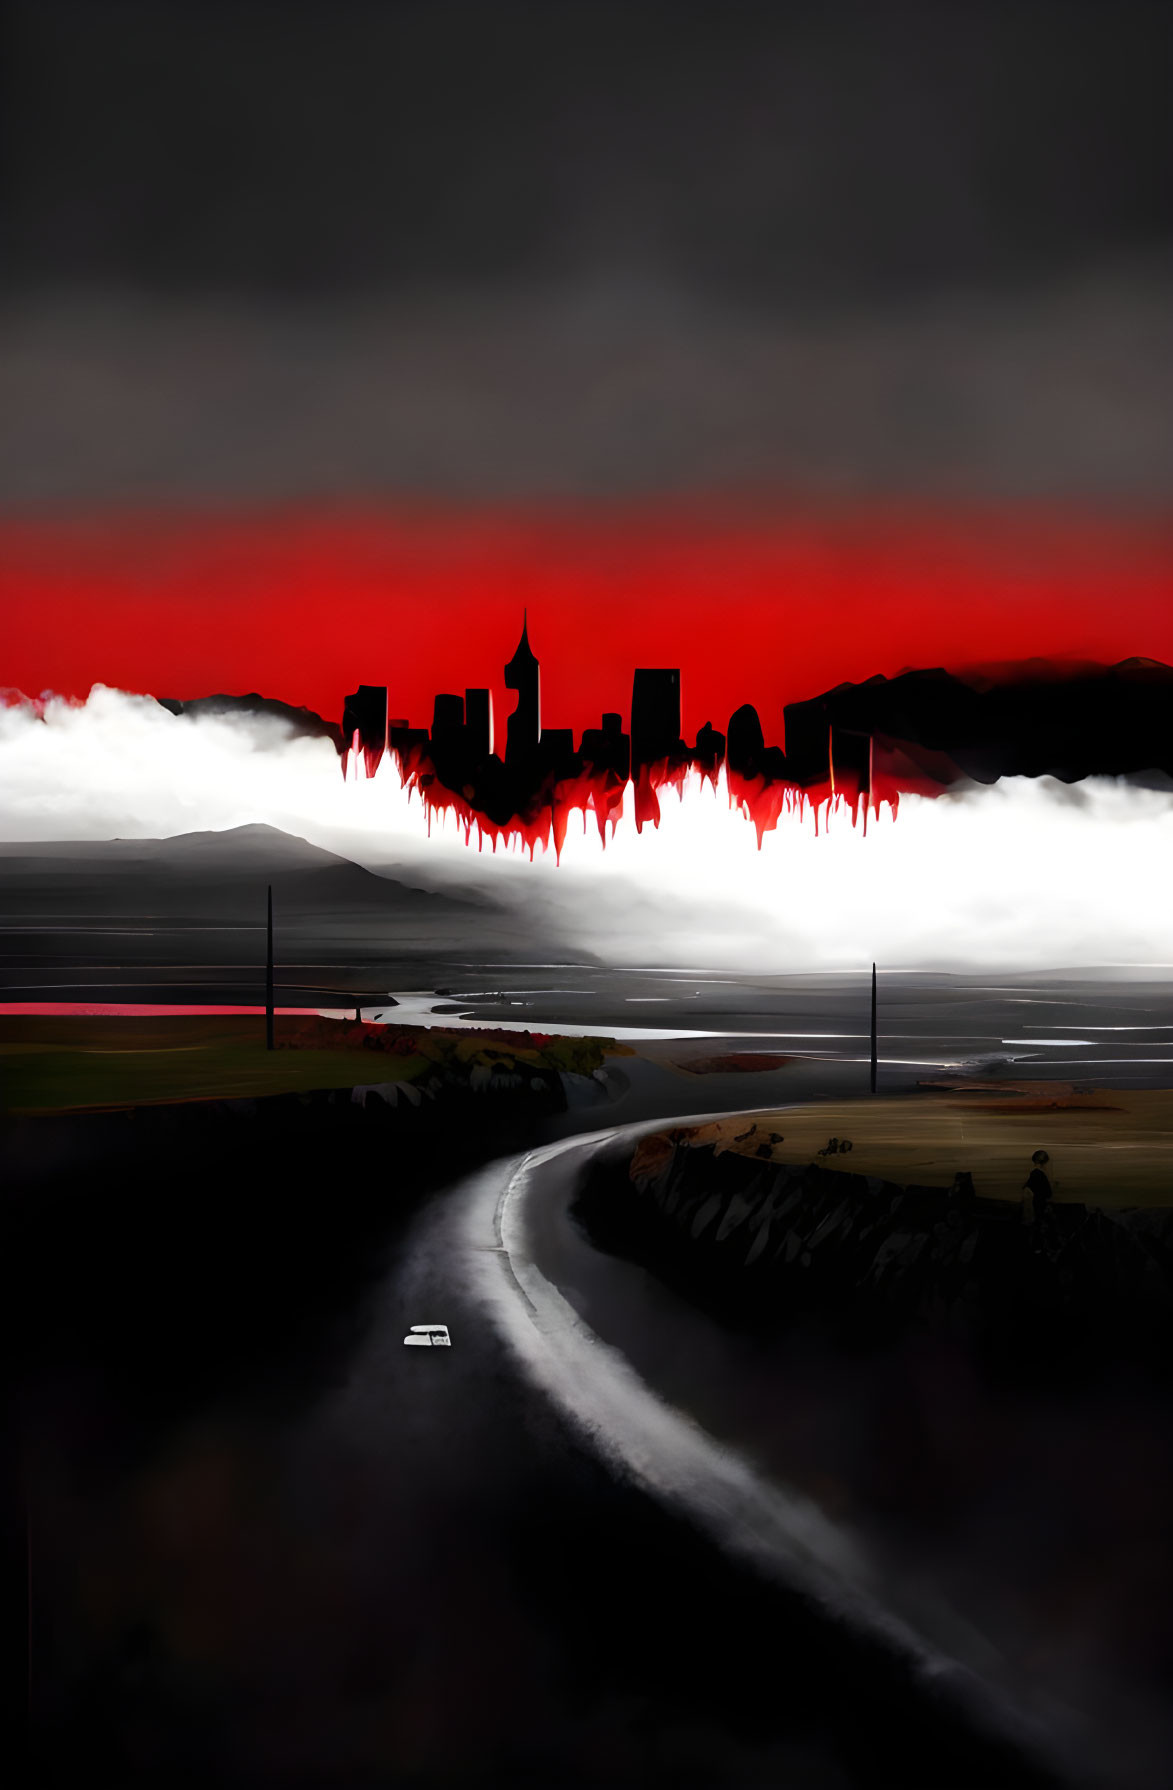 City skyline inverted on red-clouded sky above dark landscape with road and car